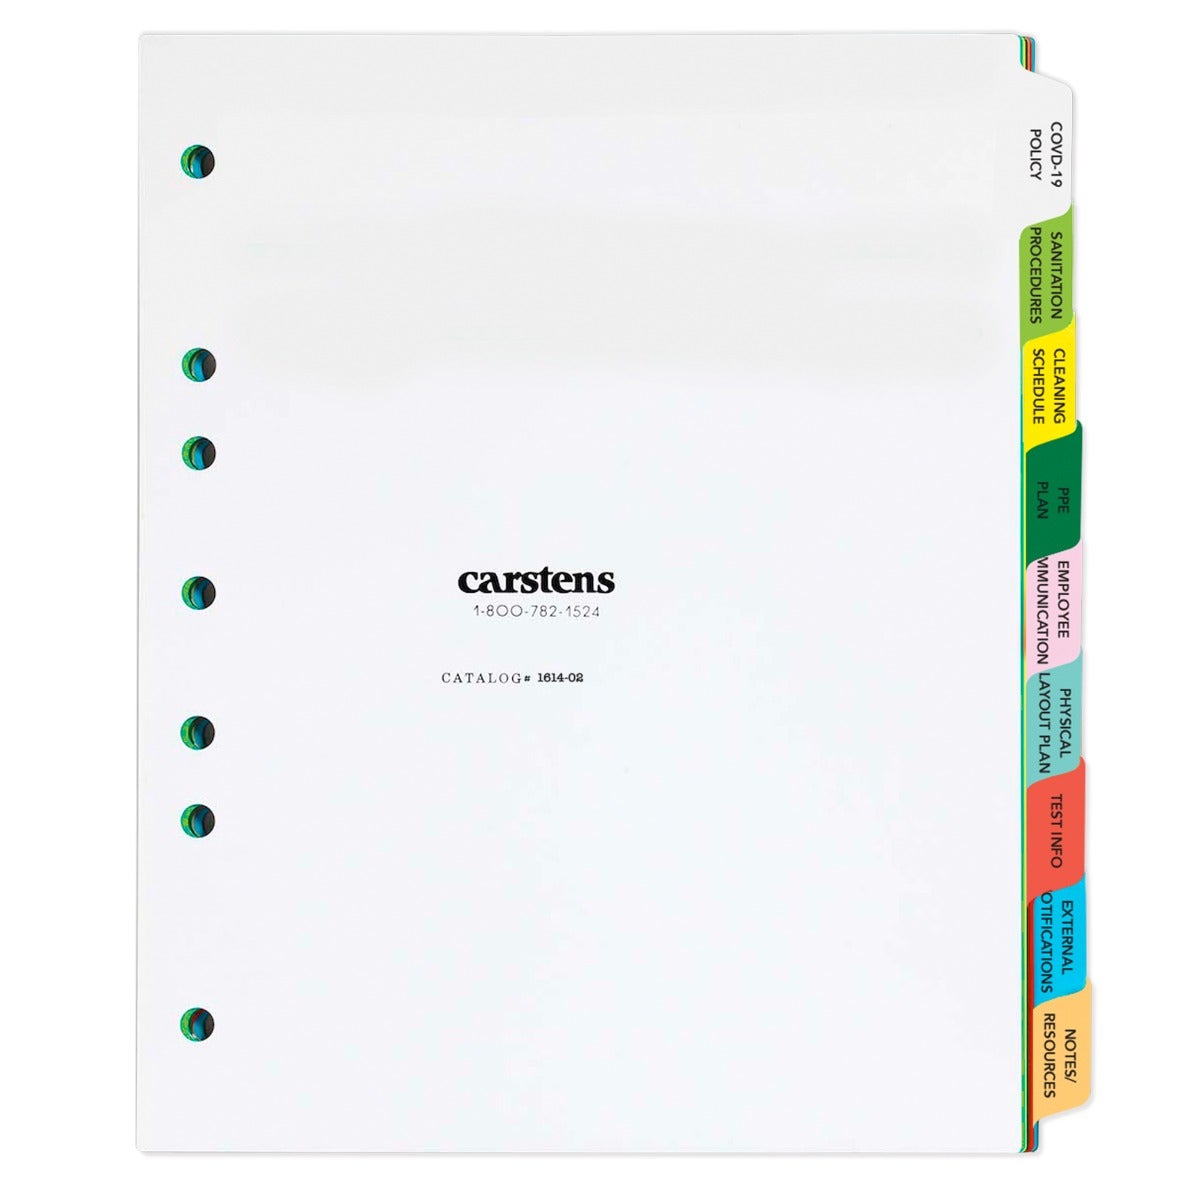 COVID-19 Policies and Procedures 3-Ring Binder with 9-Tab Plastic Divider Set – Side Opening